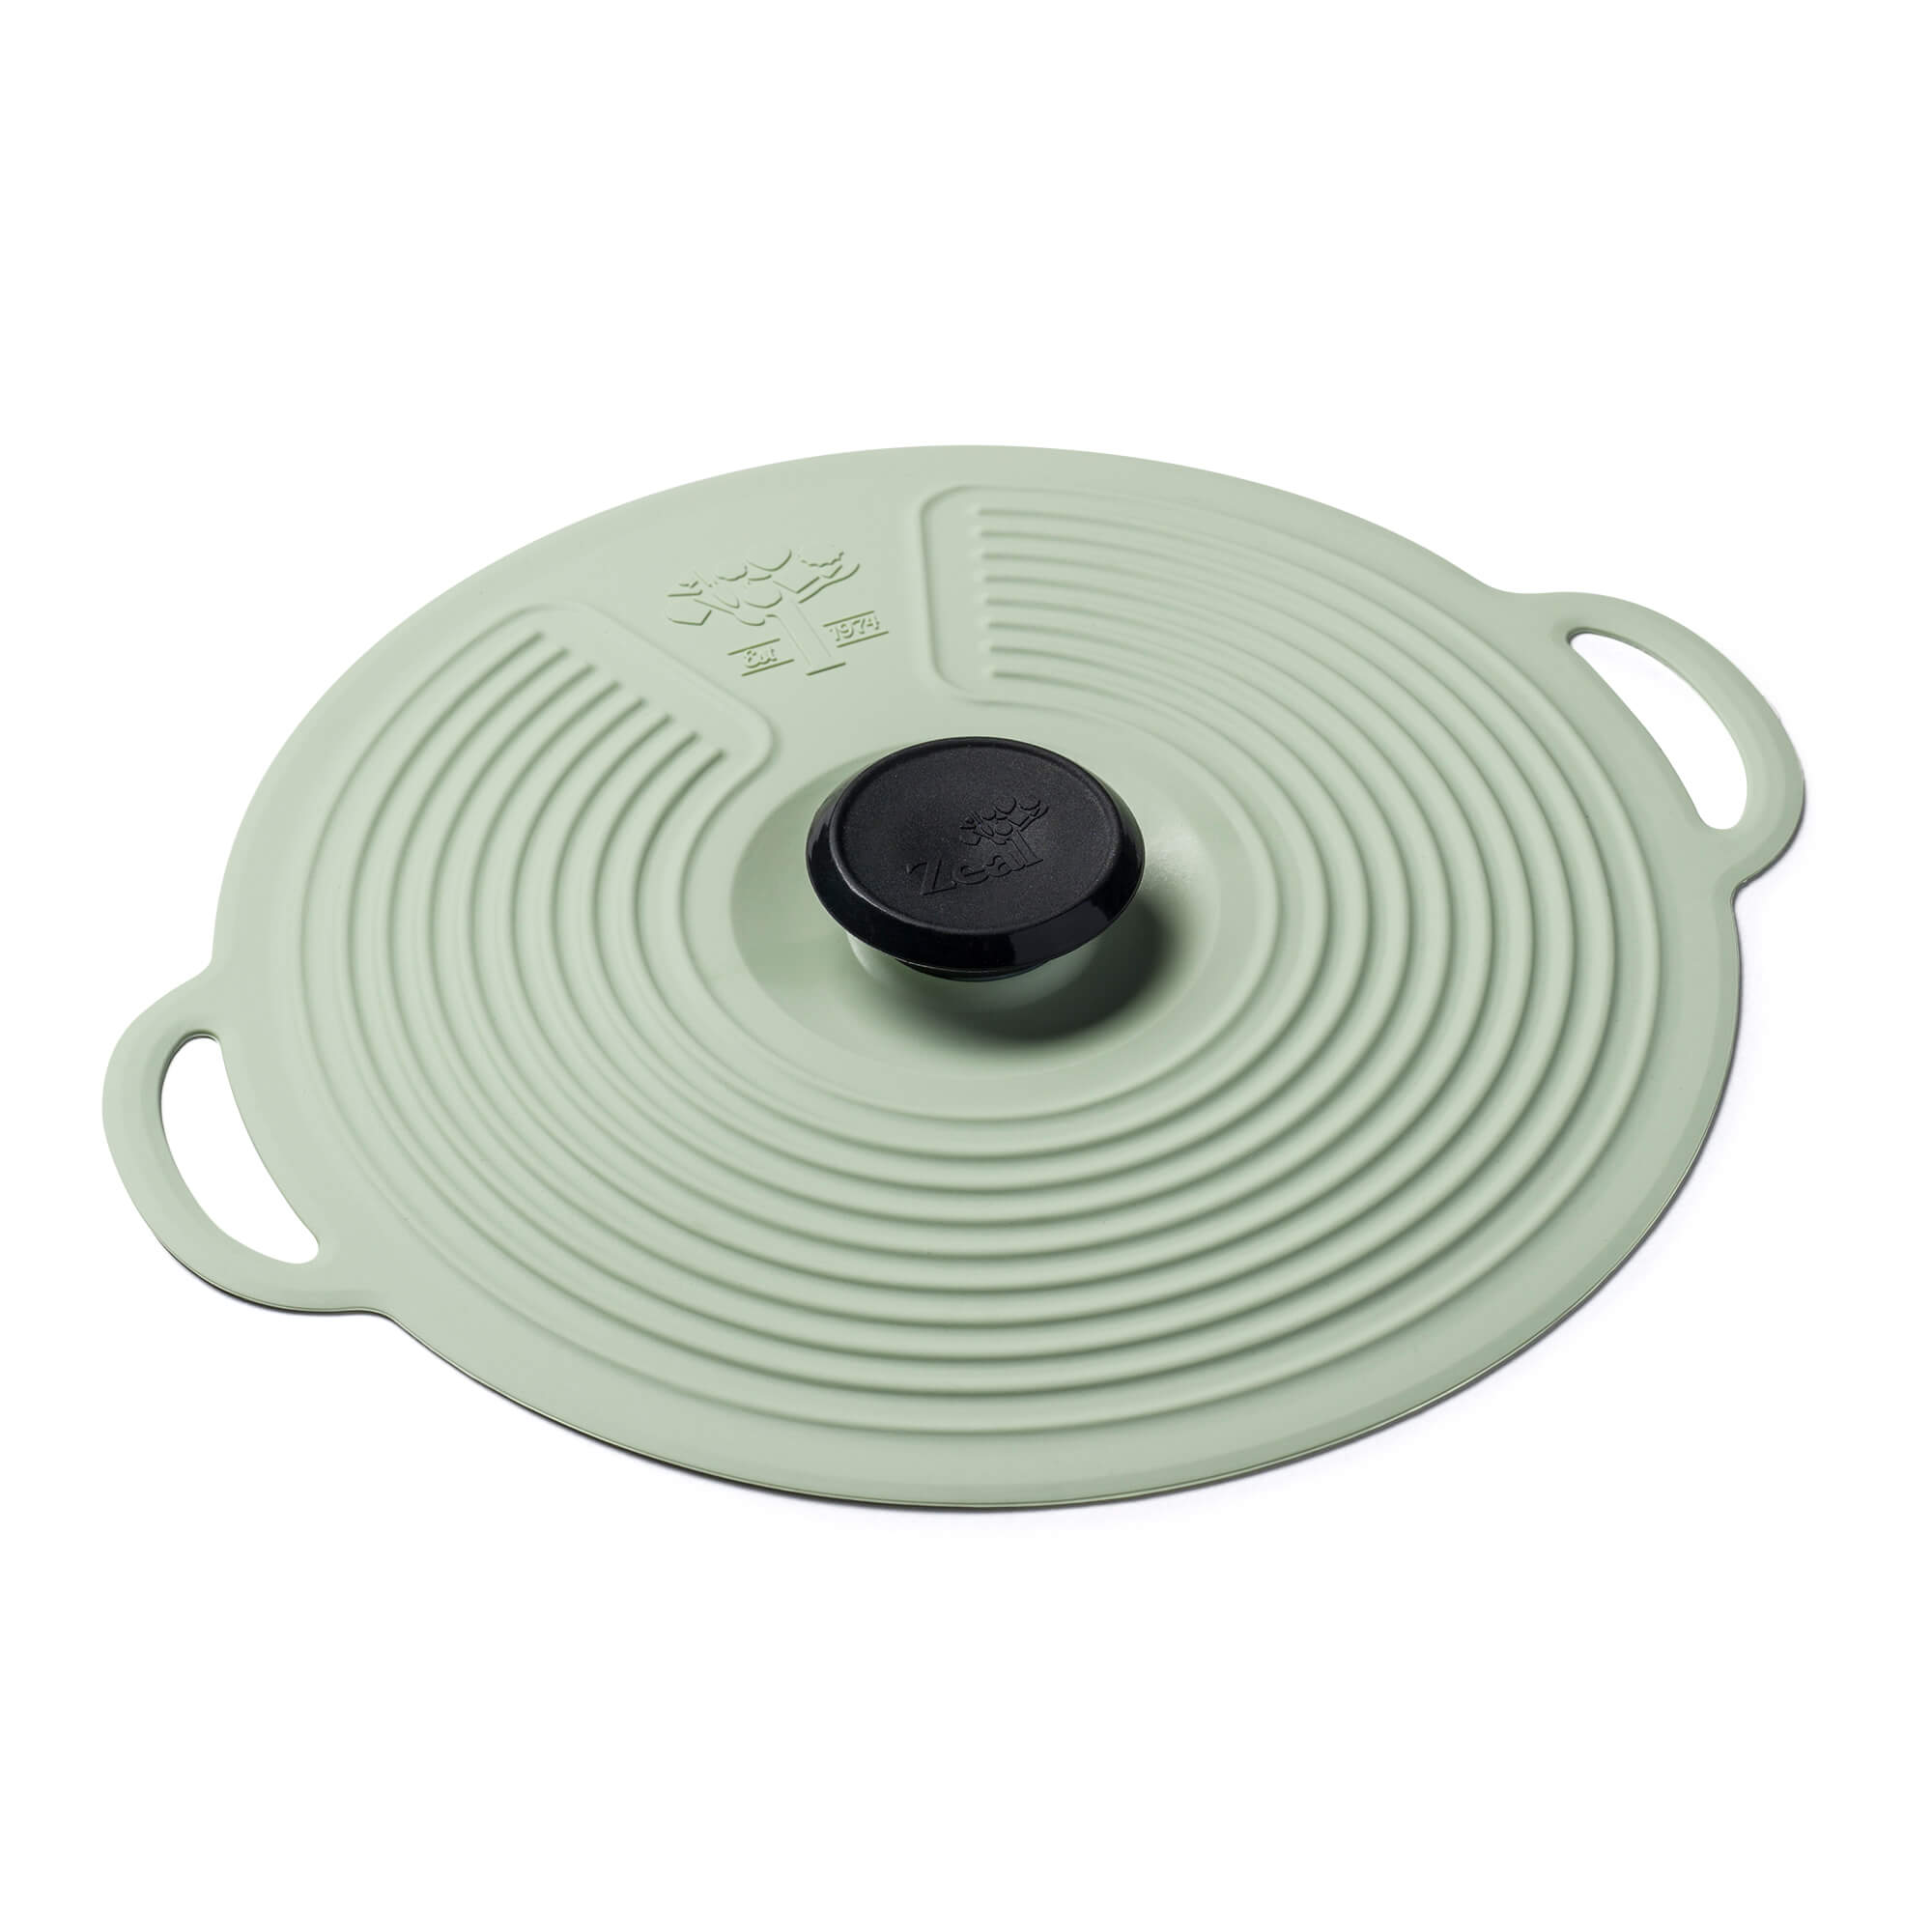 Large Sage Green Silicone Self Sealing Lid by Zeal